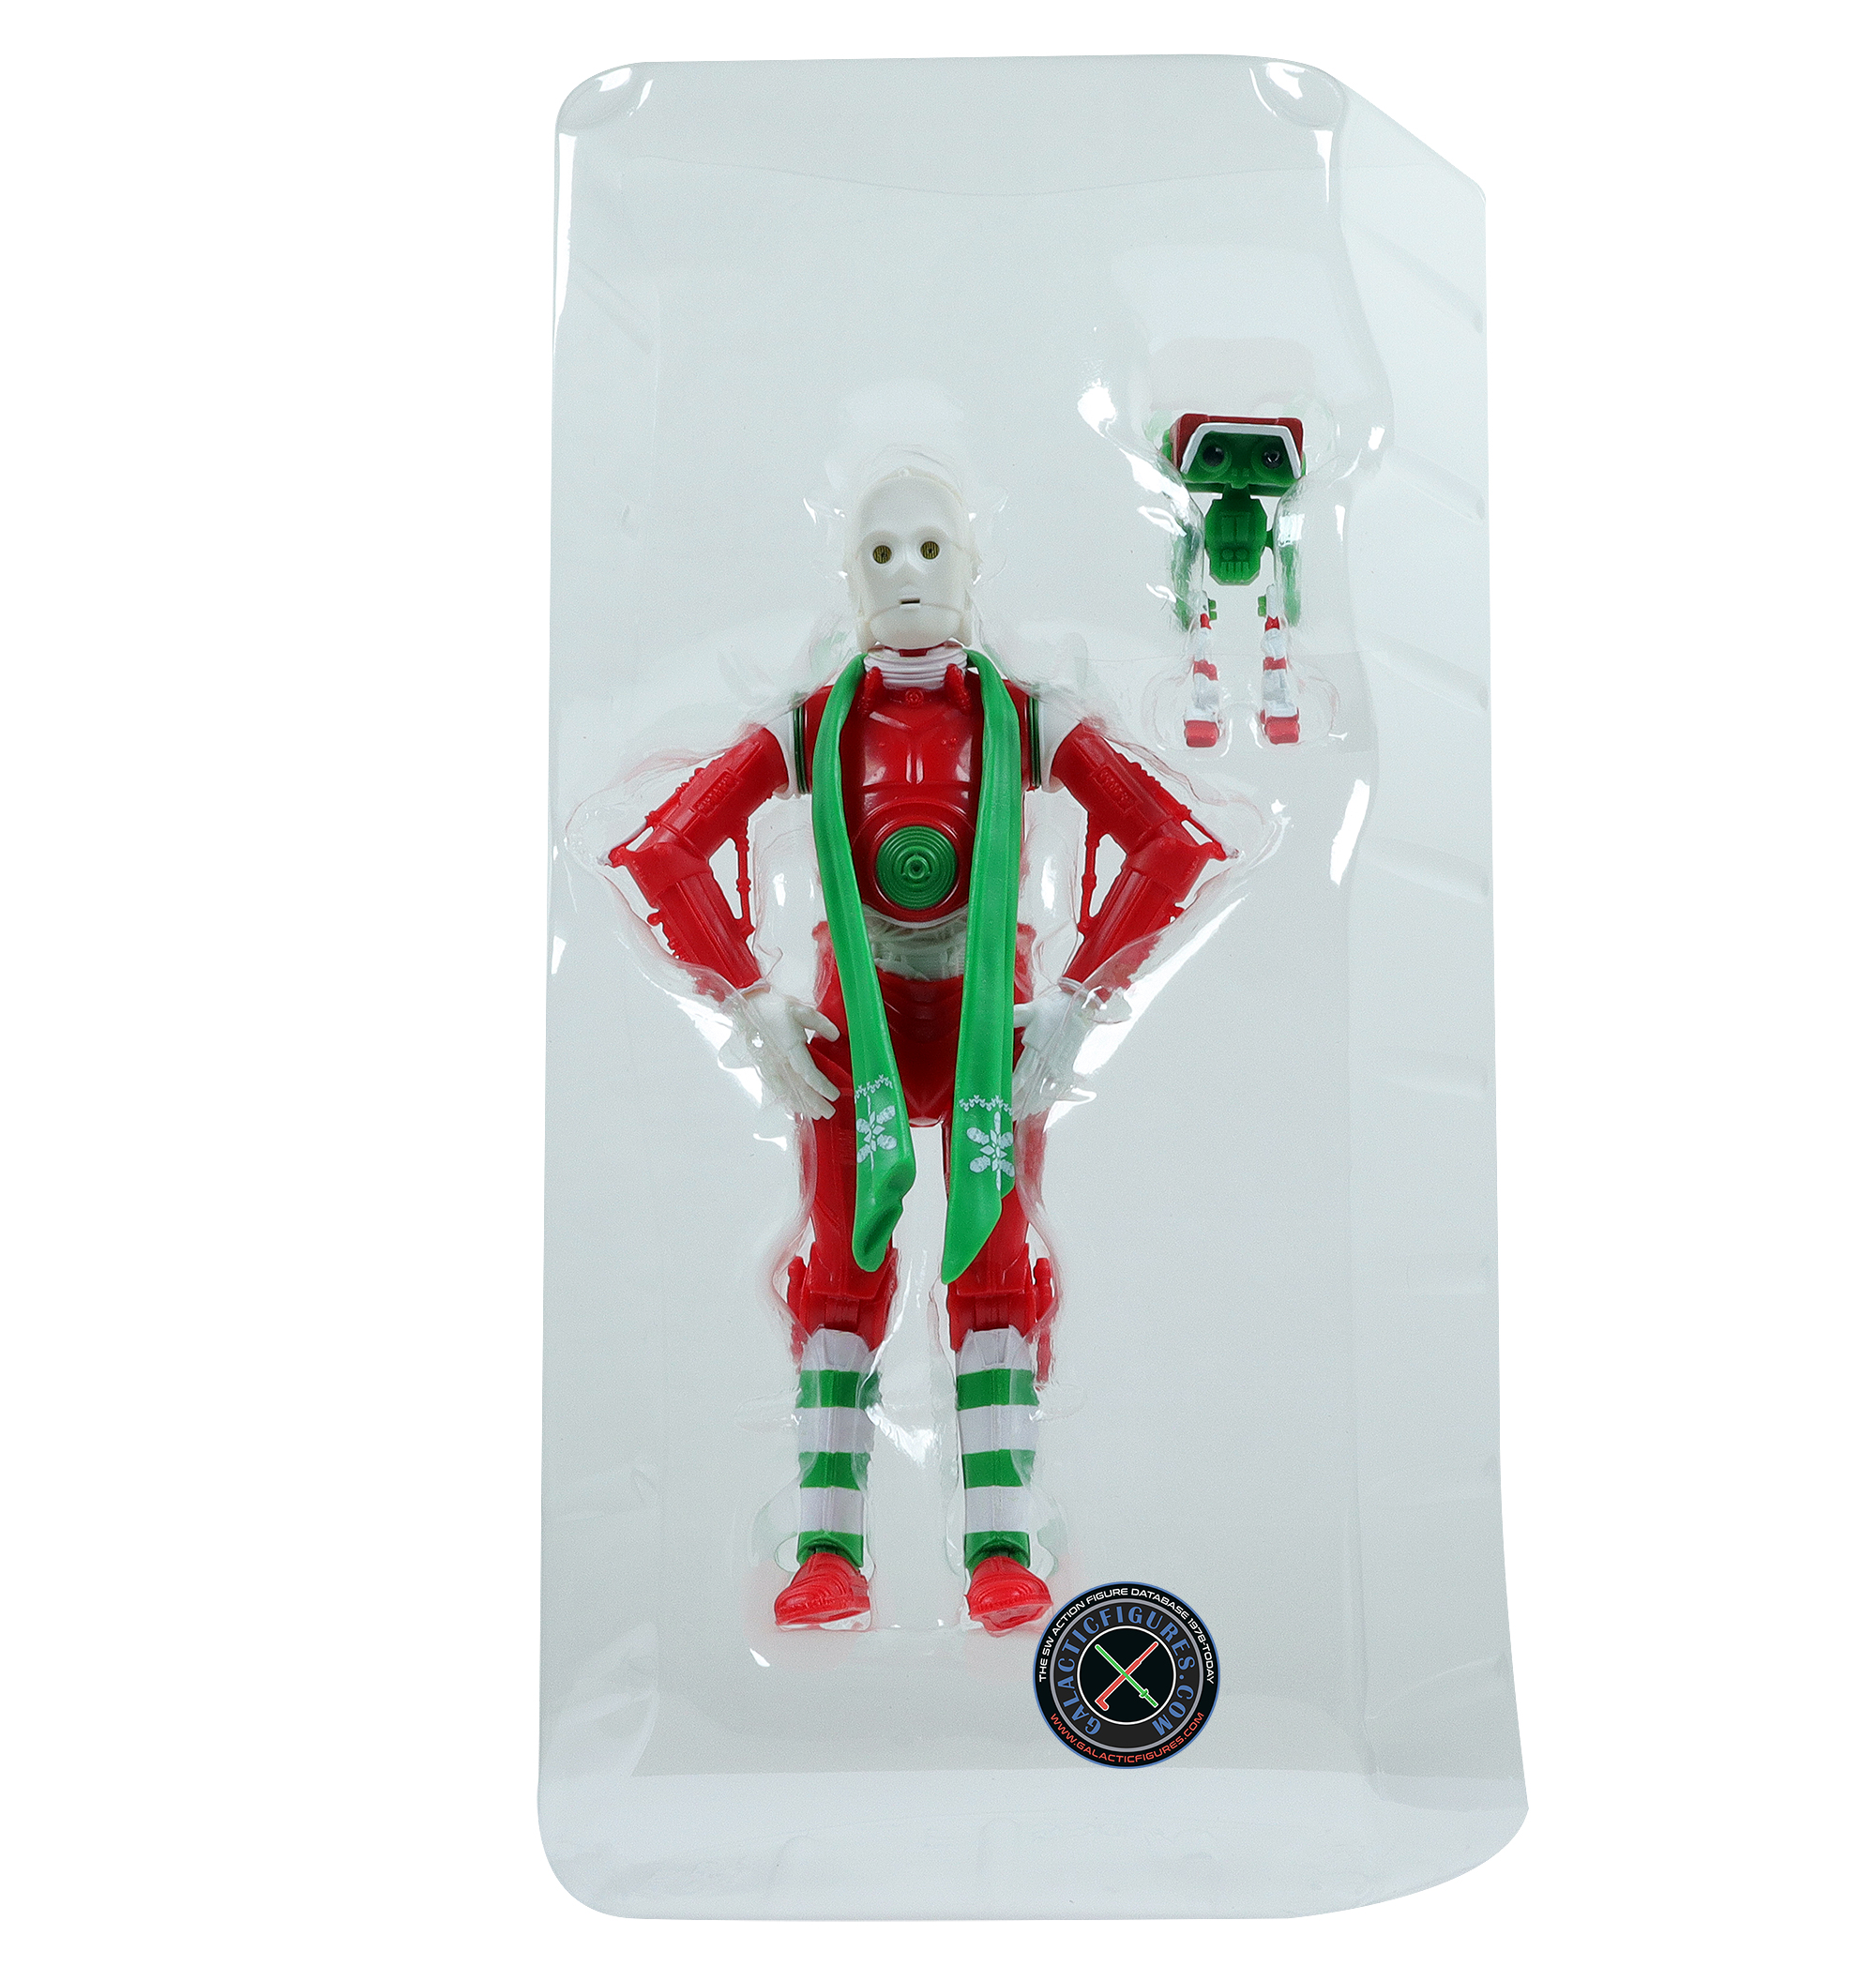 Protocol Droid 2022 Holiday Edition 2-Pack #2 of 6